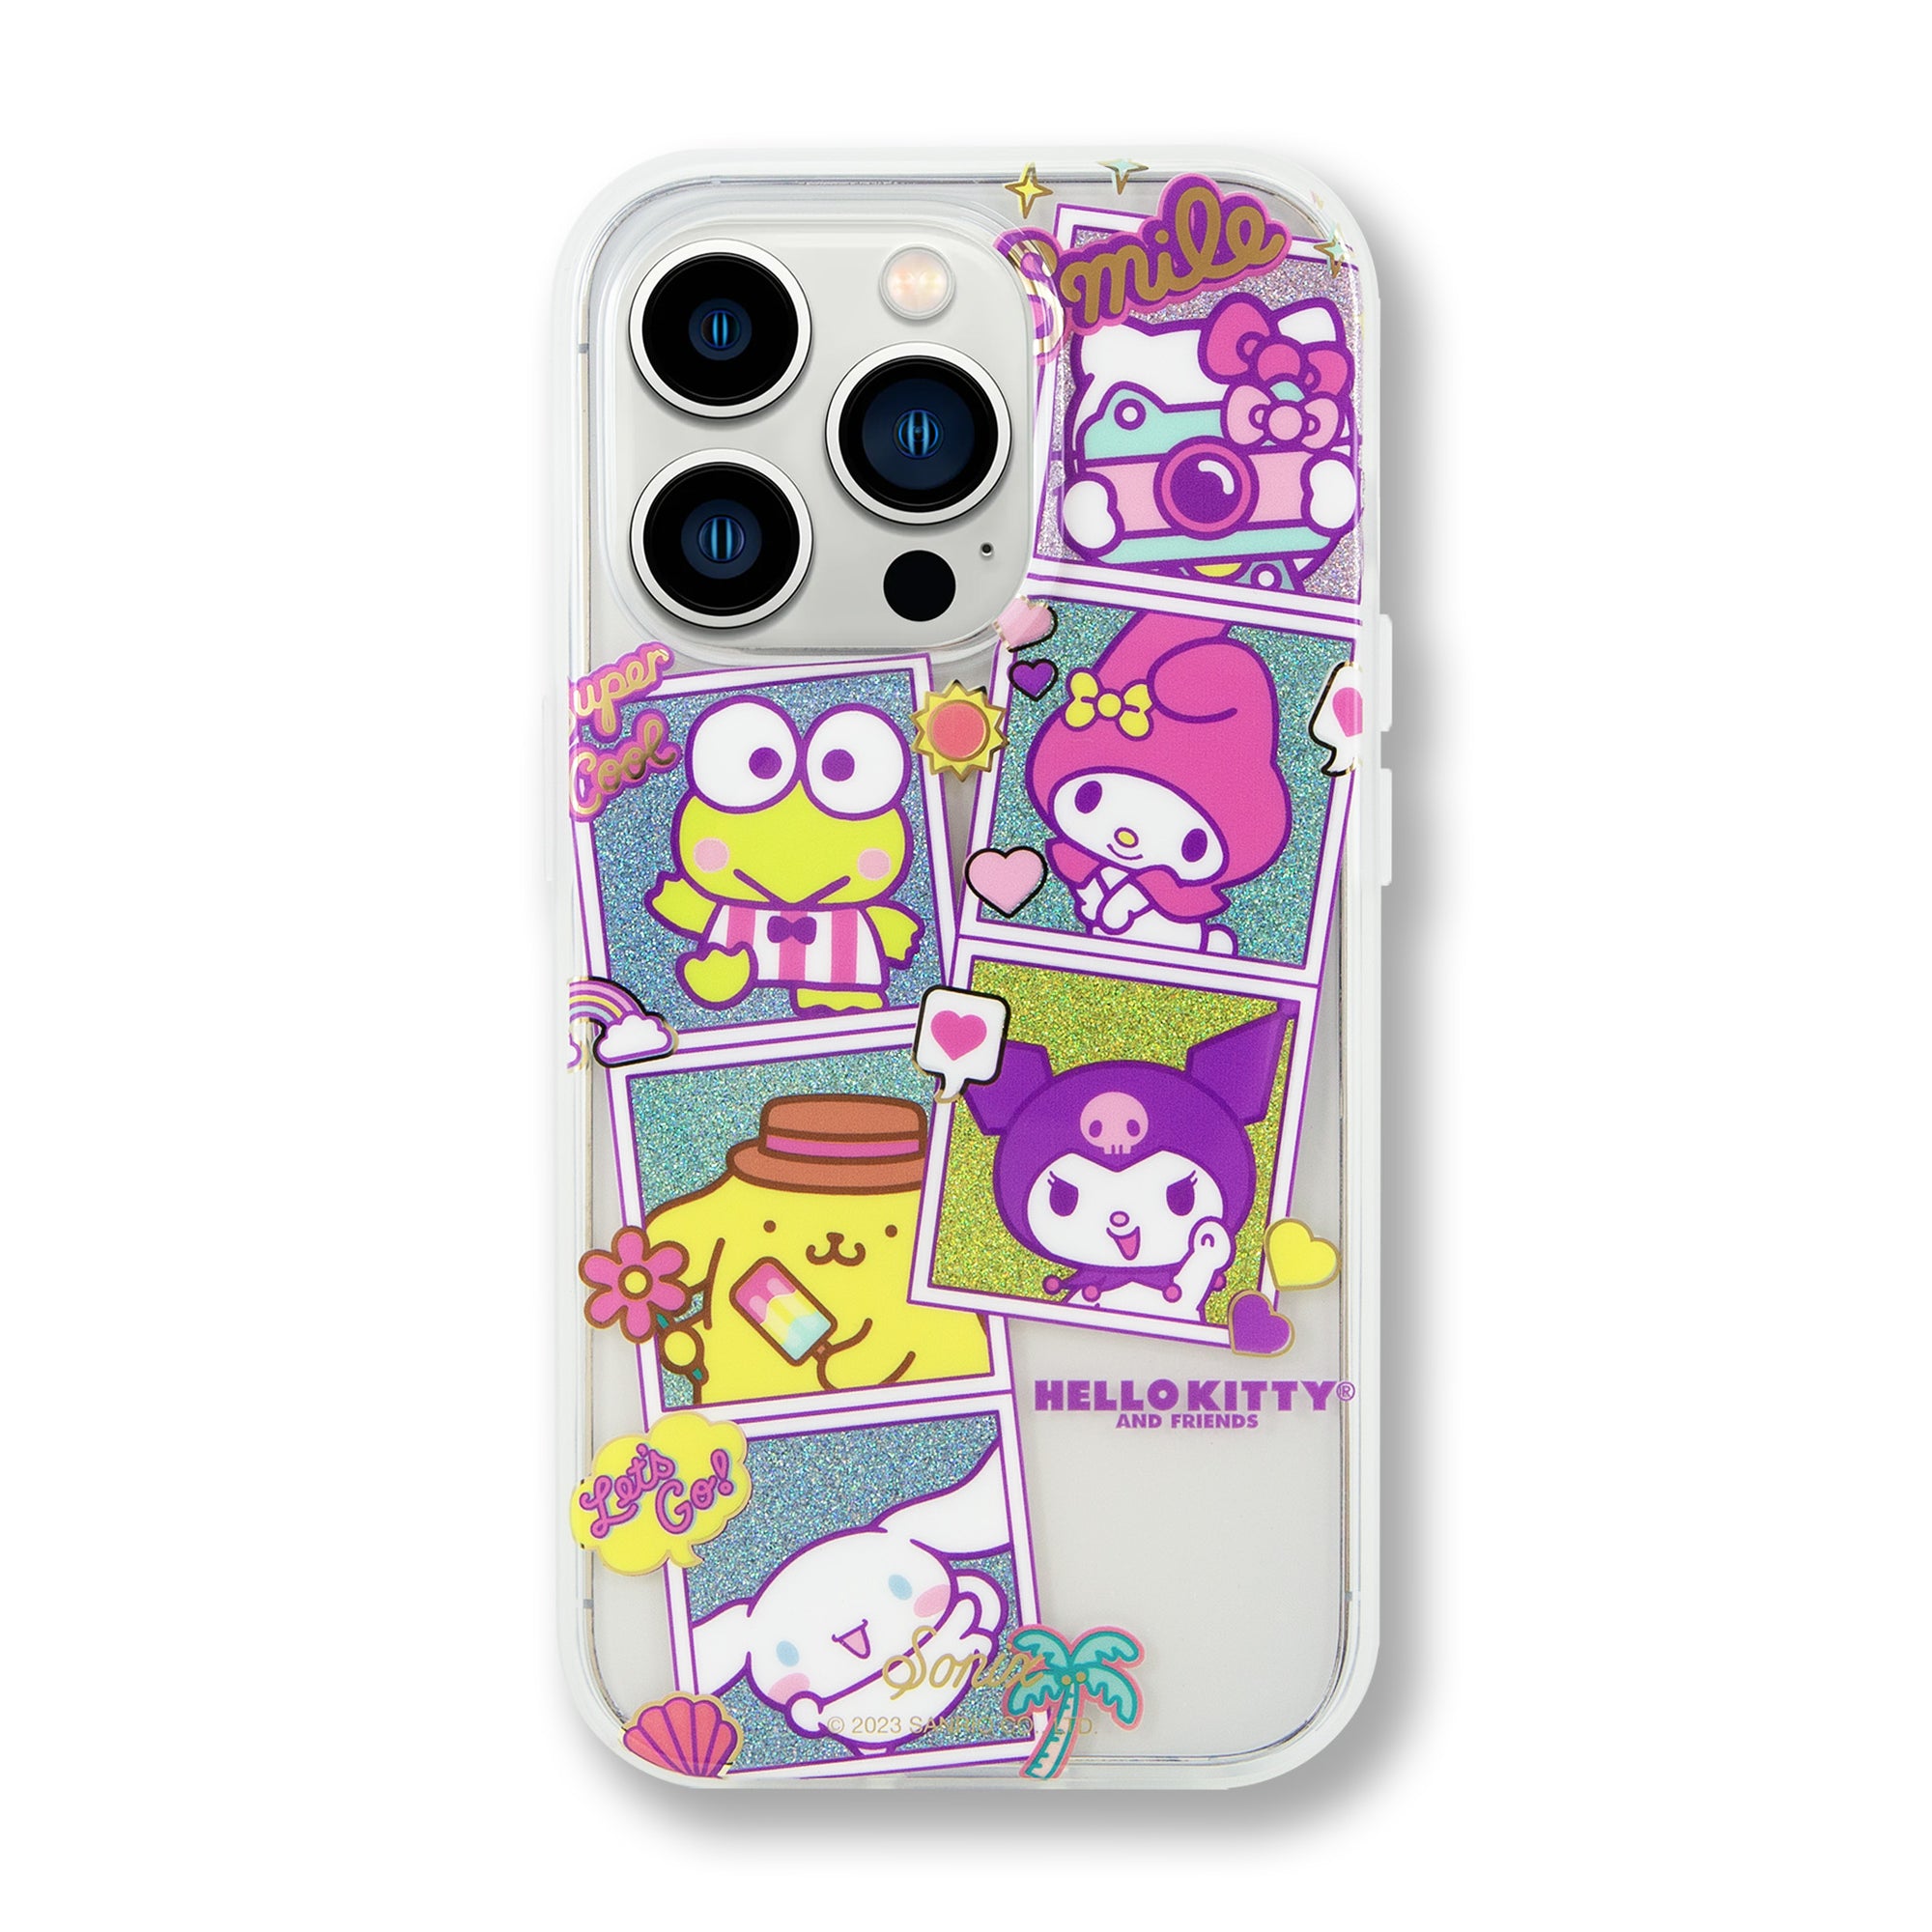 Hello Kitty and Friends x Sonix Snapshots iPhone Case Accessory BySonix Inc.   